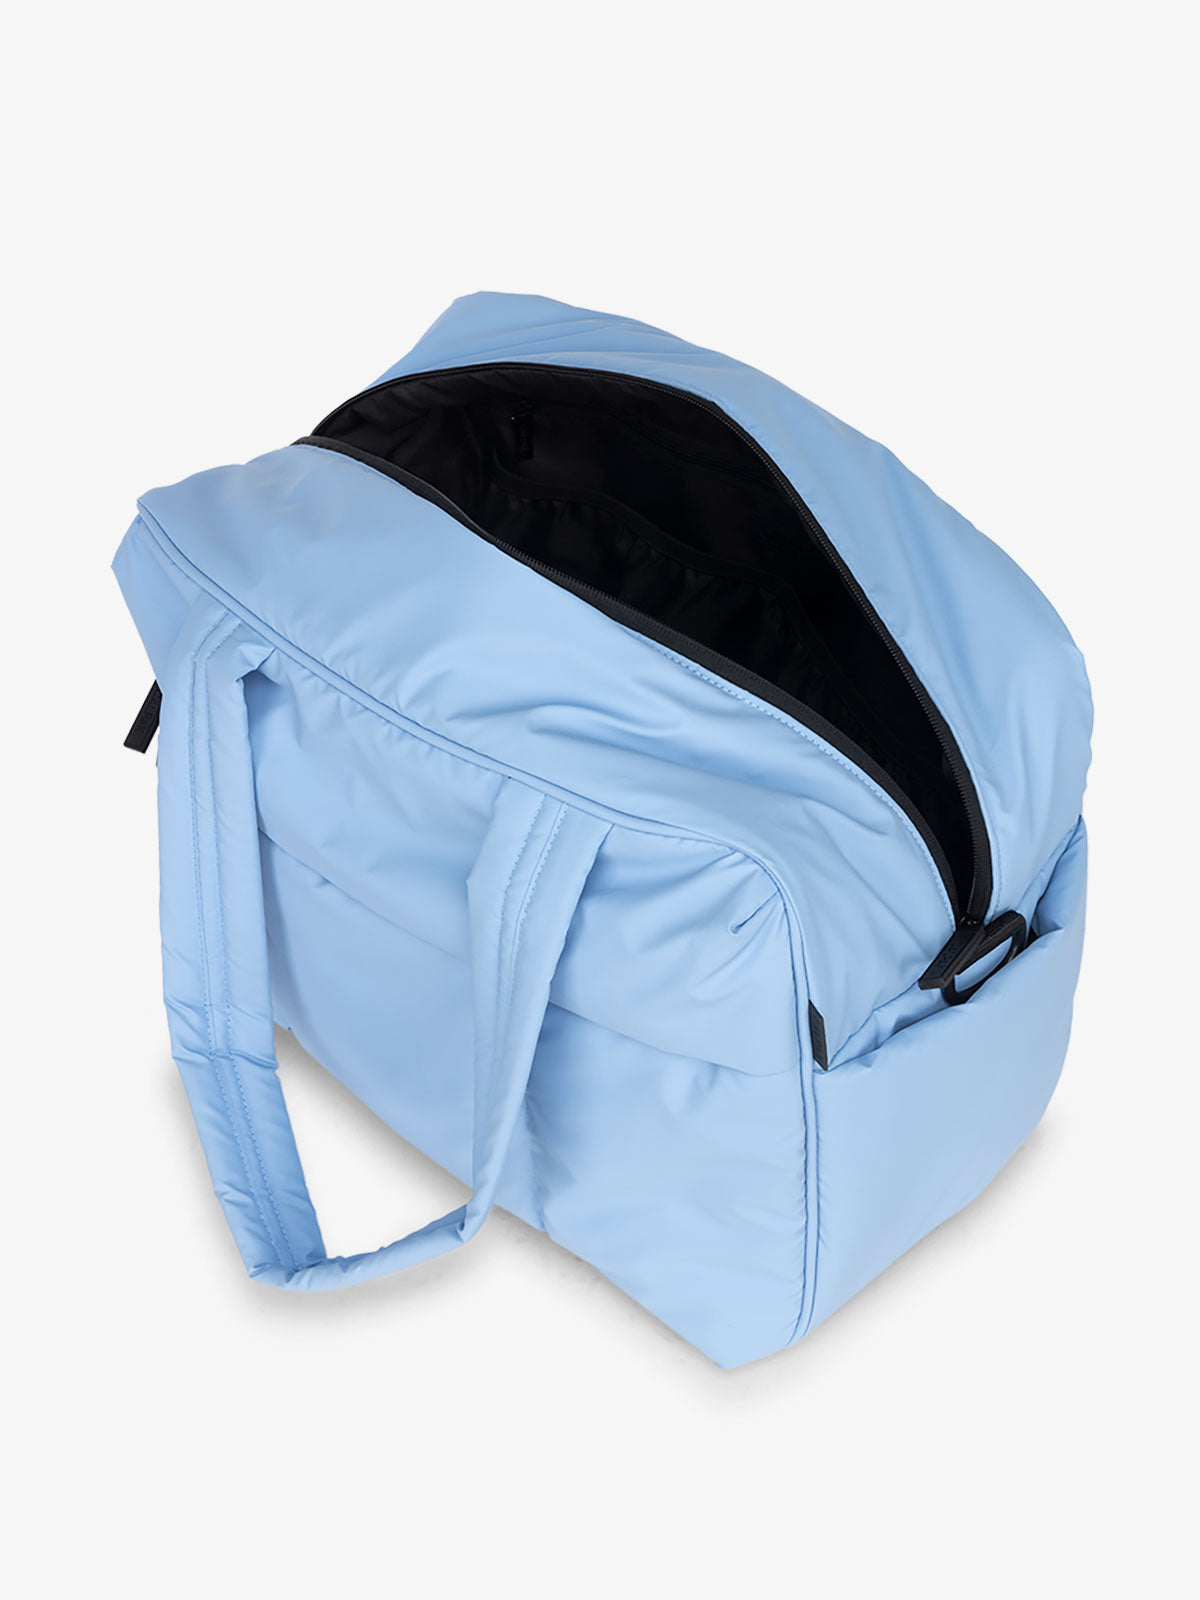 CALPAK Water Resistant Luka Duffle Bag with multiple pockets and top handles in light blue